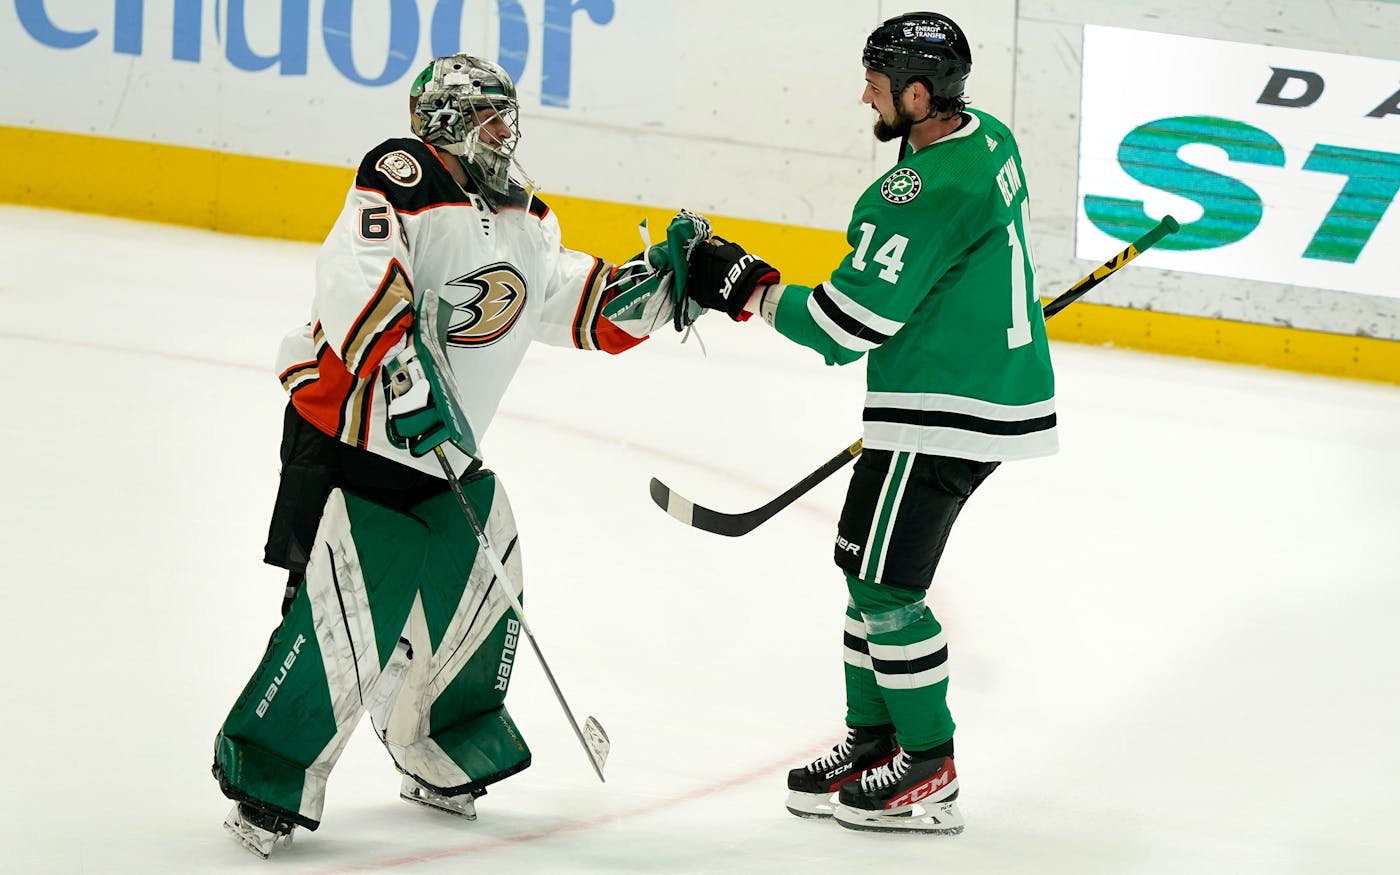 How an Insurance Salesman Wound Up Playing Goalie Against the Dallas Stars